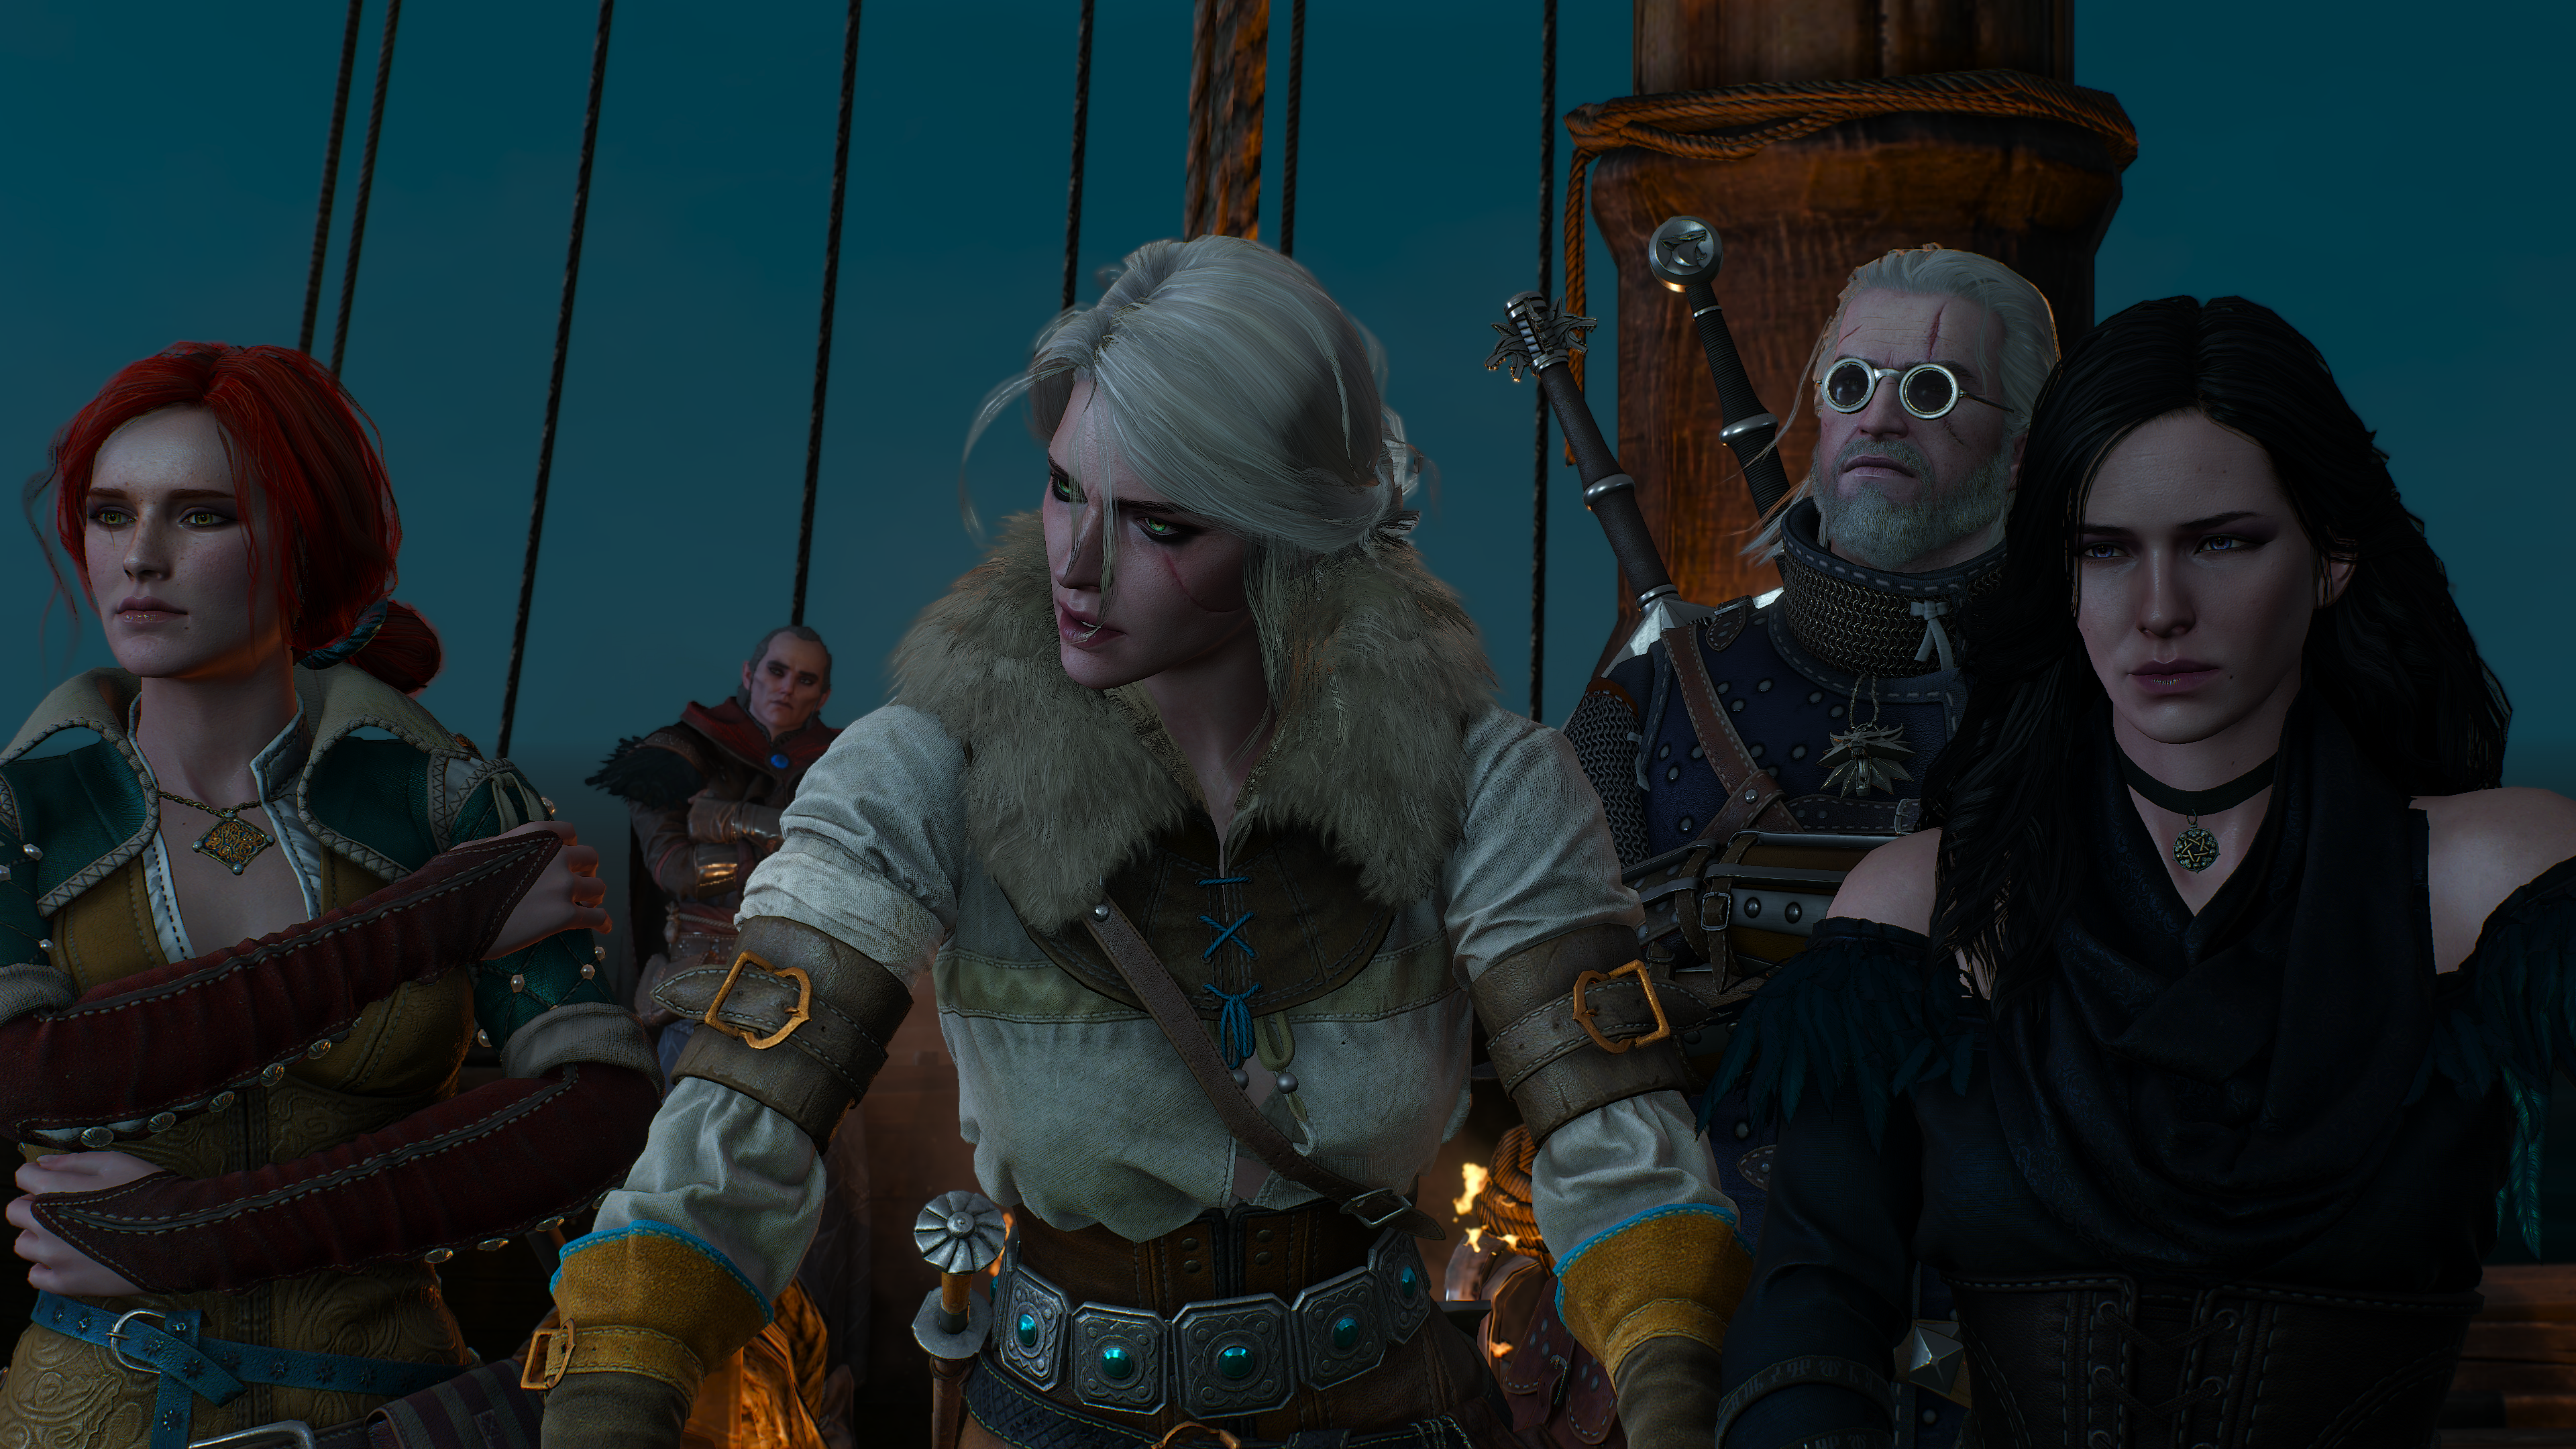 General 3840x2160 The Witcher The Witcher 3: Wild Hunt 4K Geralt of Rivia Yennefer of Vengerberg Triss Merigold Cirilla Fiona Elen Riannon screen shot Avallac'h CD Projekt RED video game characters